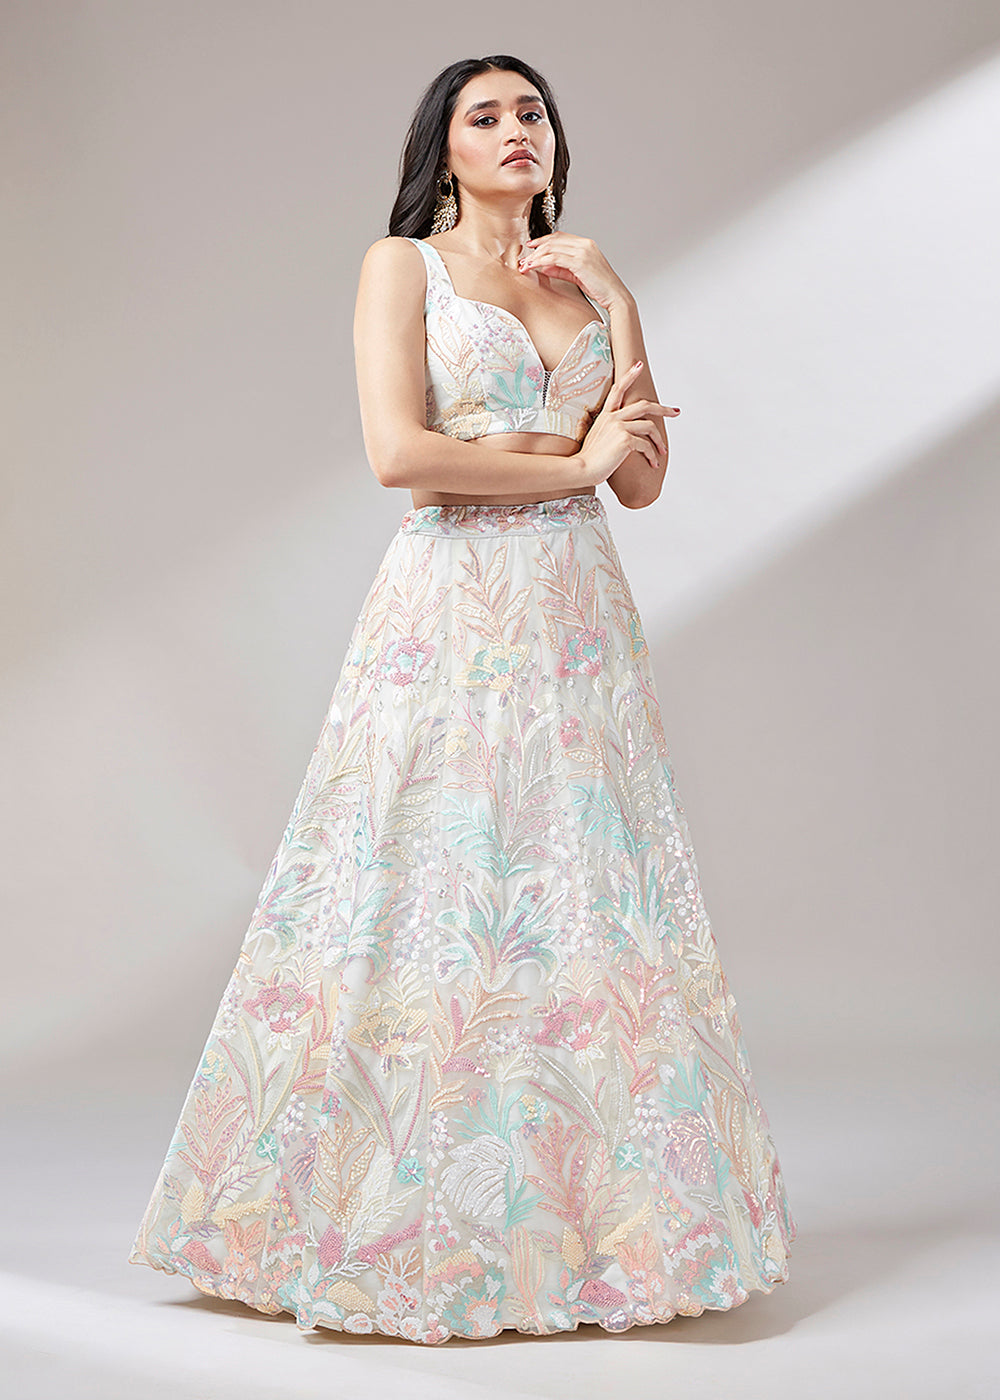 Buy Now Cream Sequinned Embroidered Bridesmaid Lehenga Choli Online in USA, UK, Canada & Worldwide at Empress Clothing.